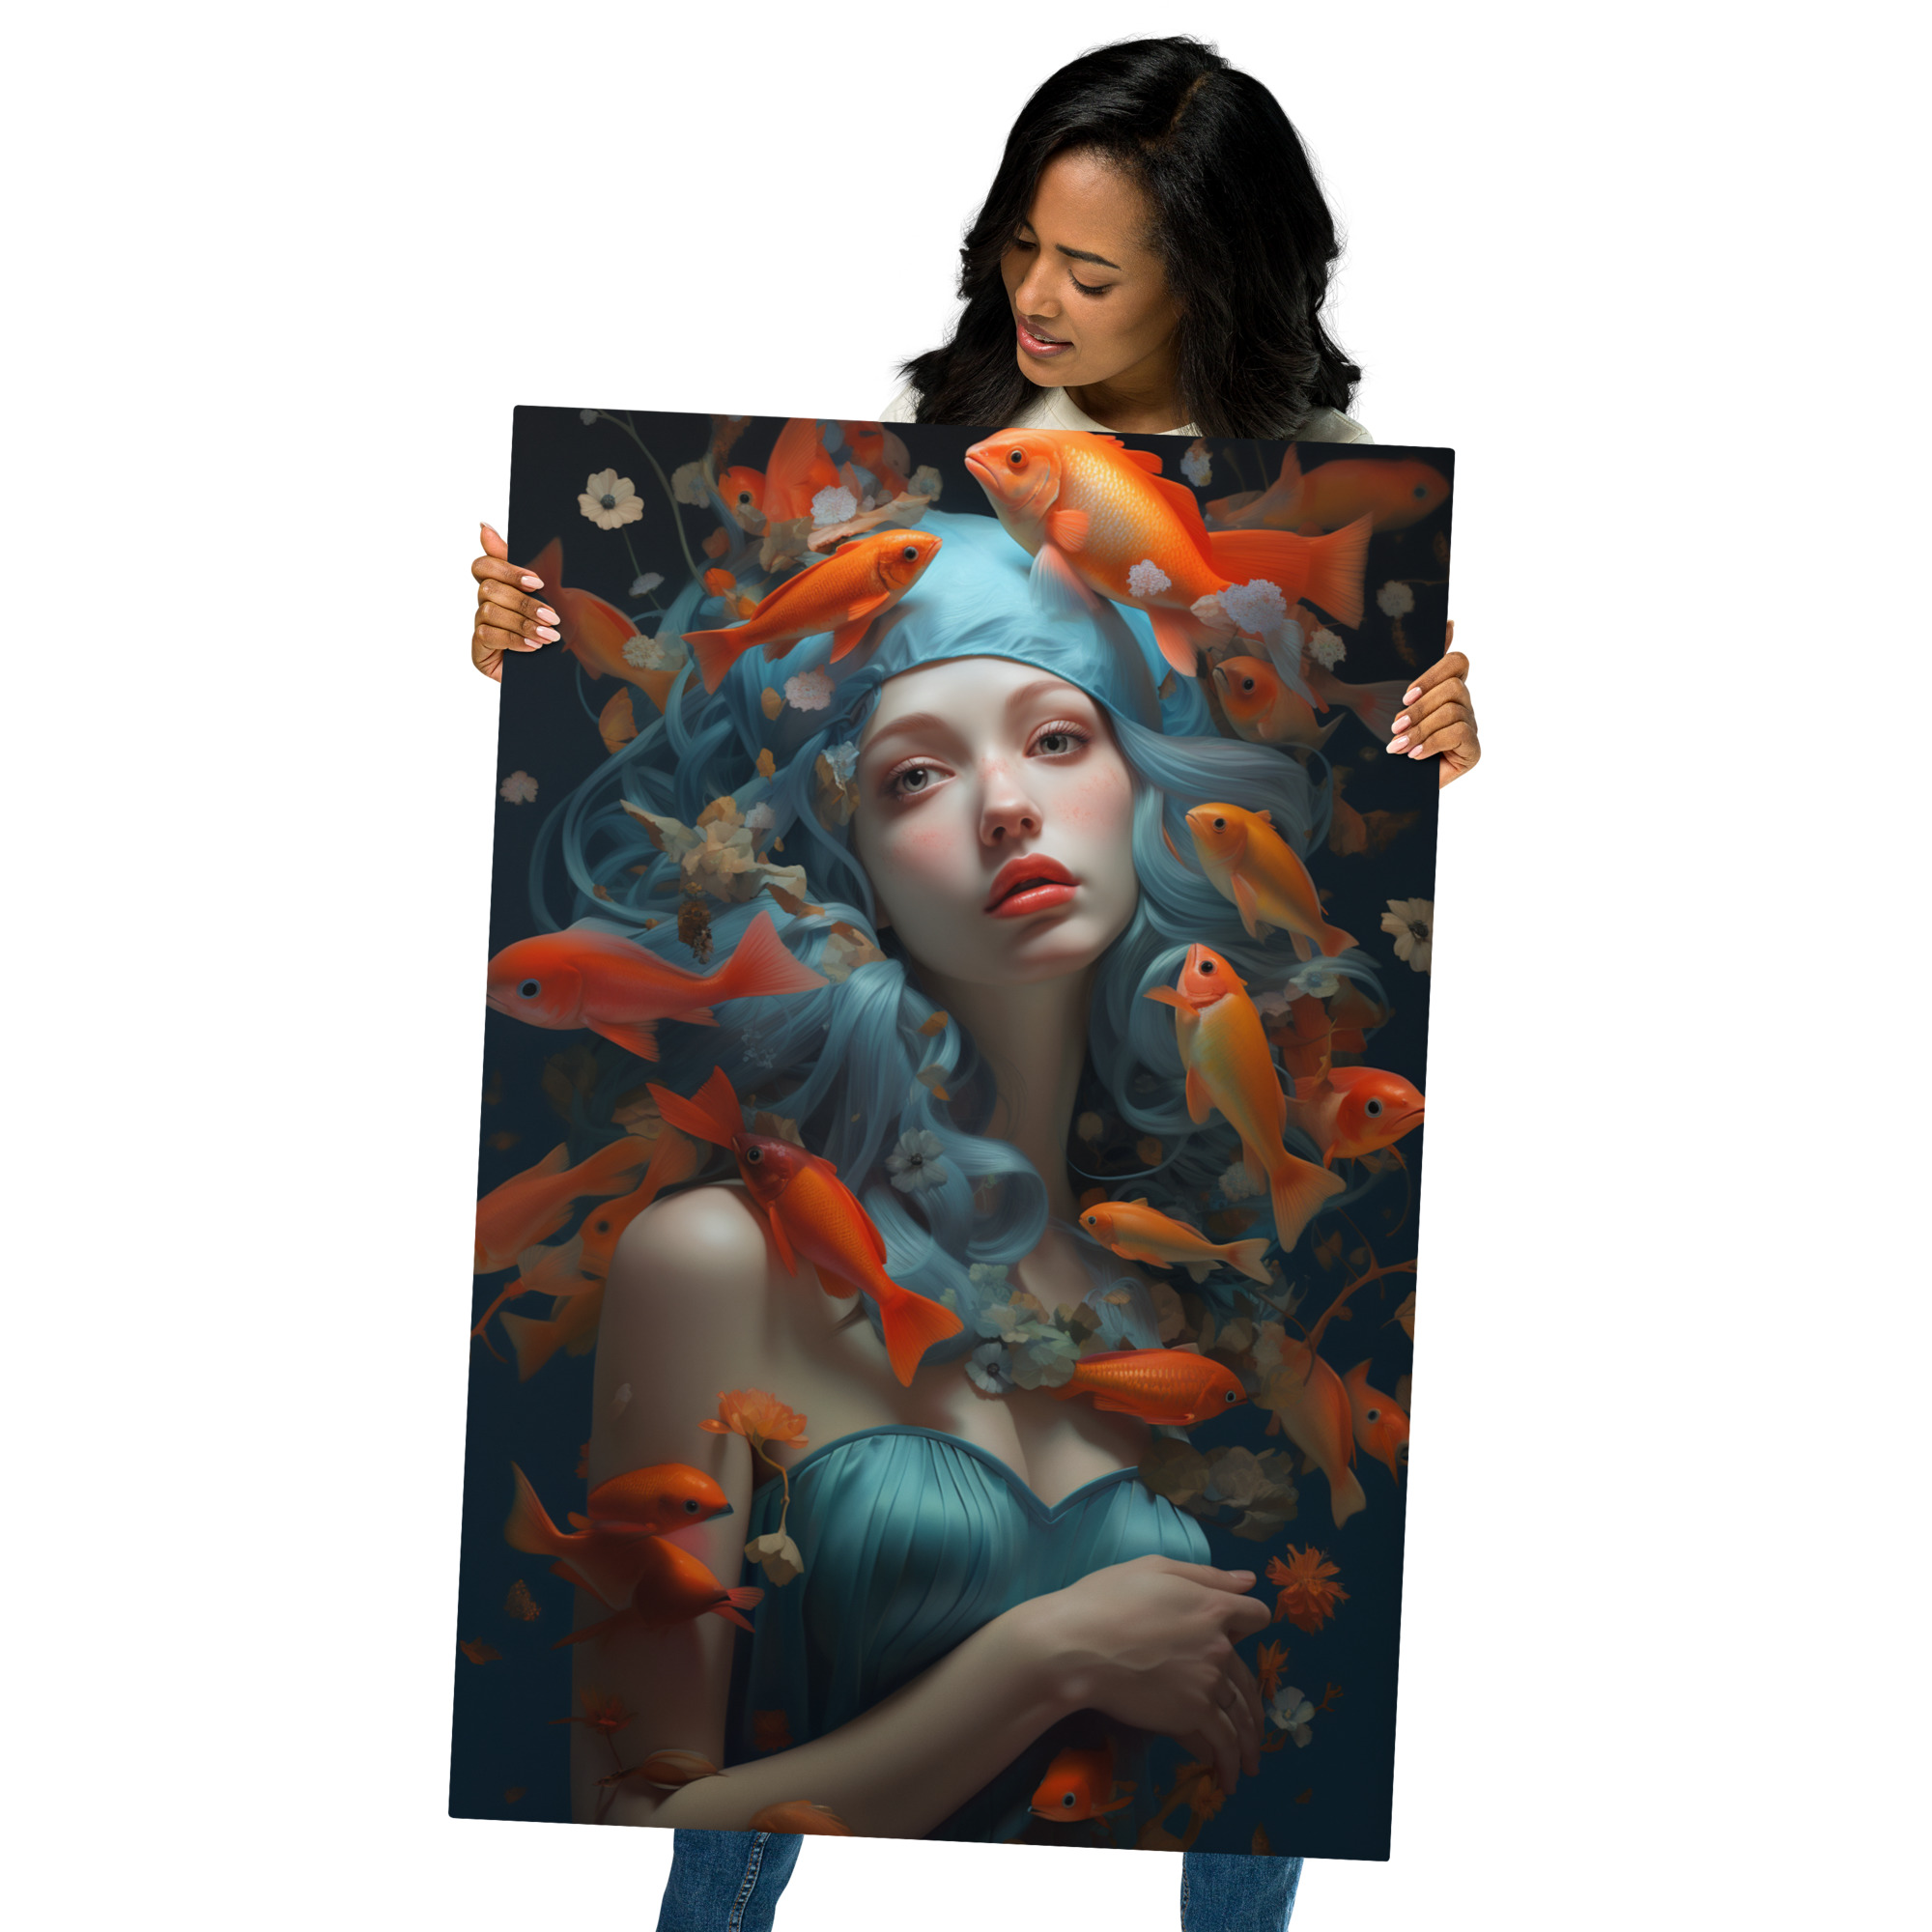 Mother Pisces by Dead Artists, Metal Print, Zodiac Sign, Astrology